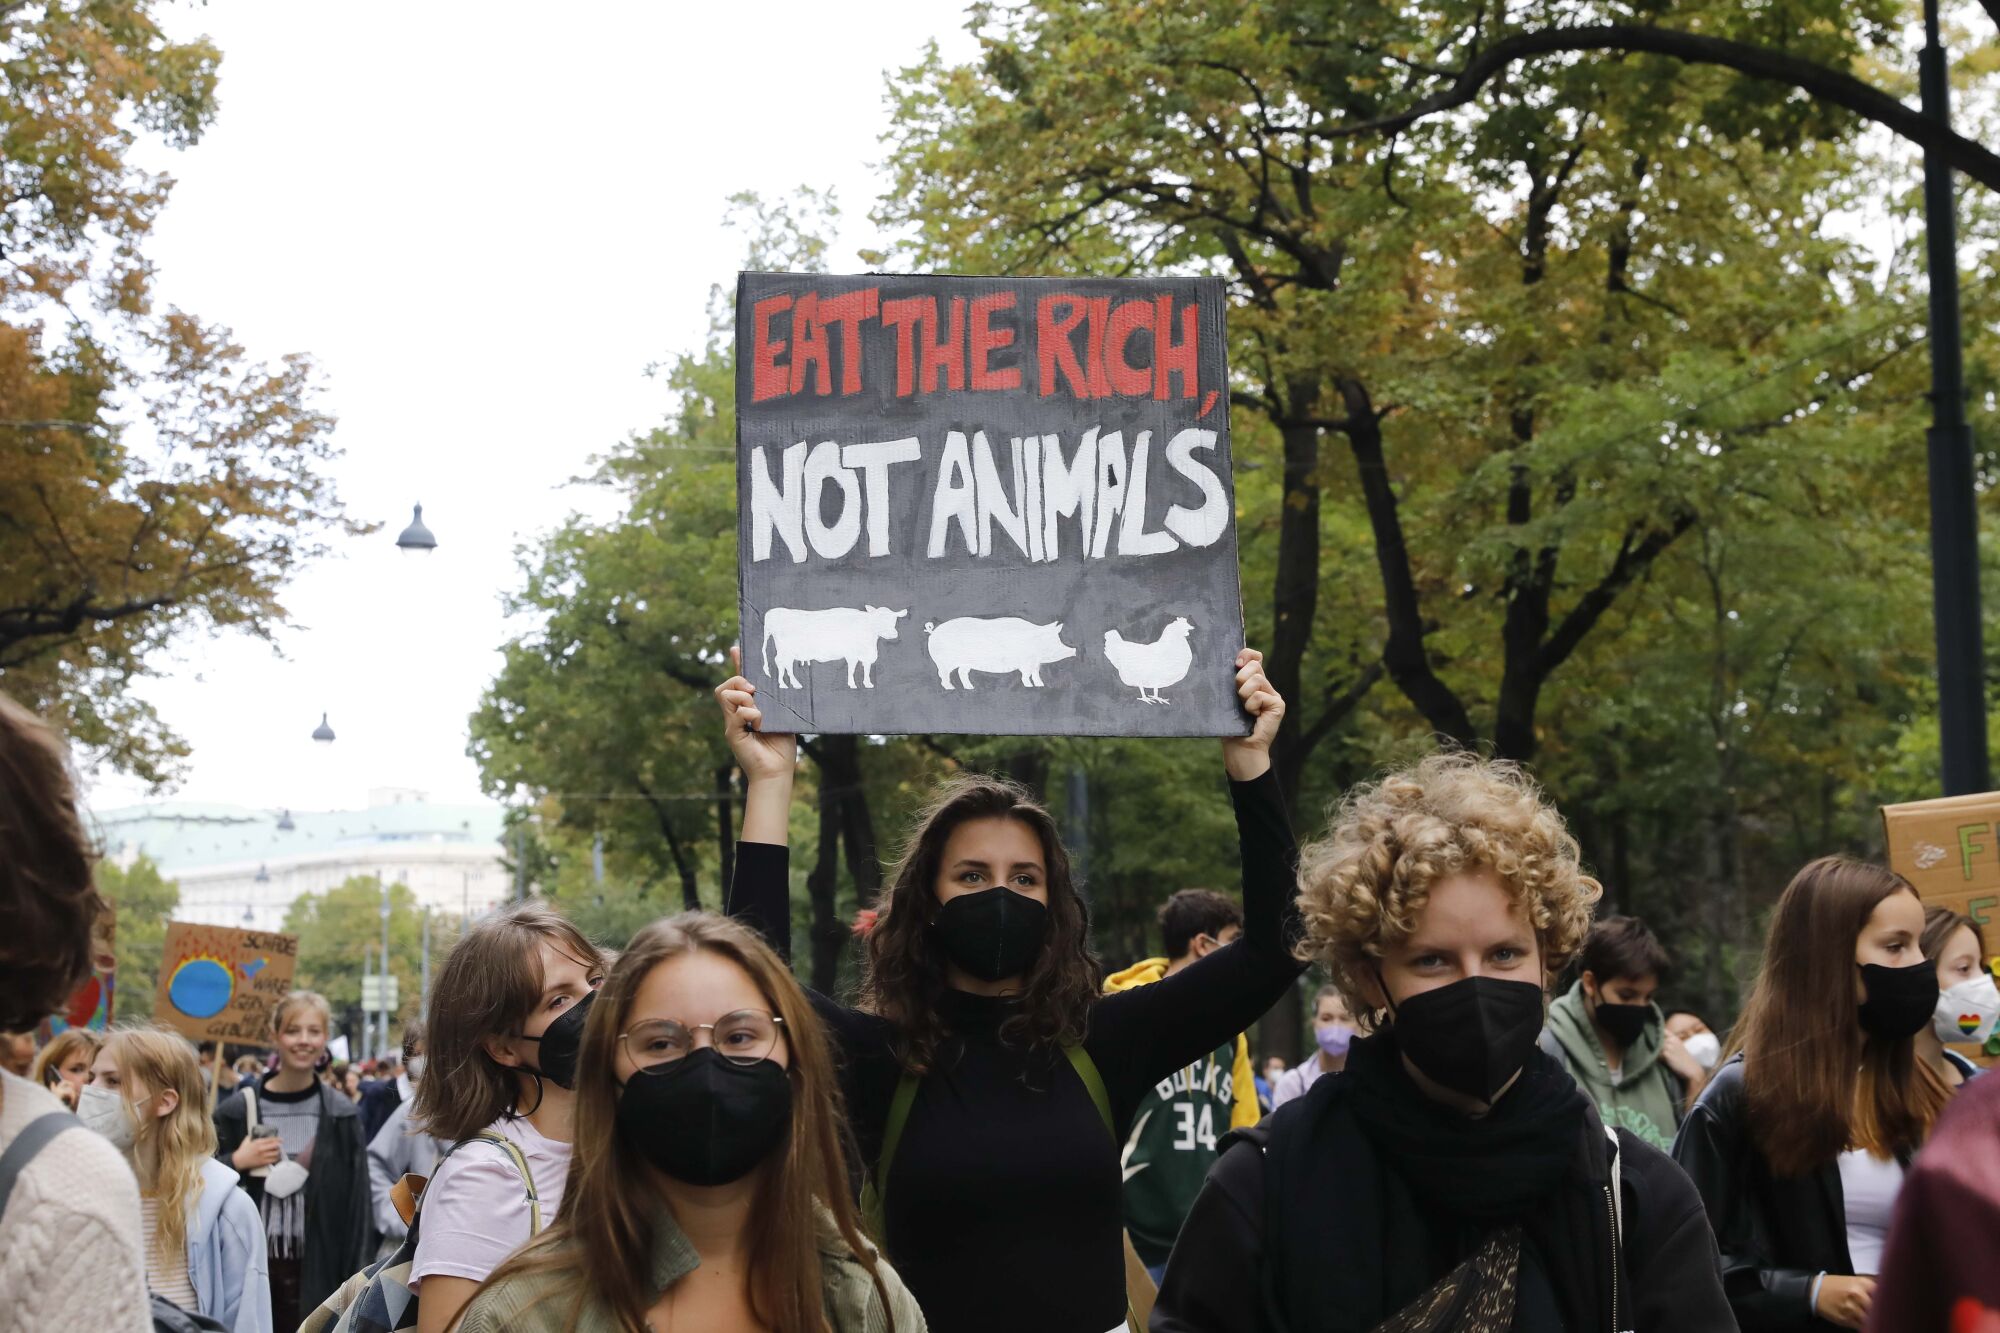 A marcher holds a sign that reads, "Eat the rich, not animals."